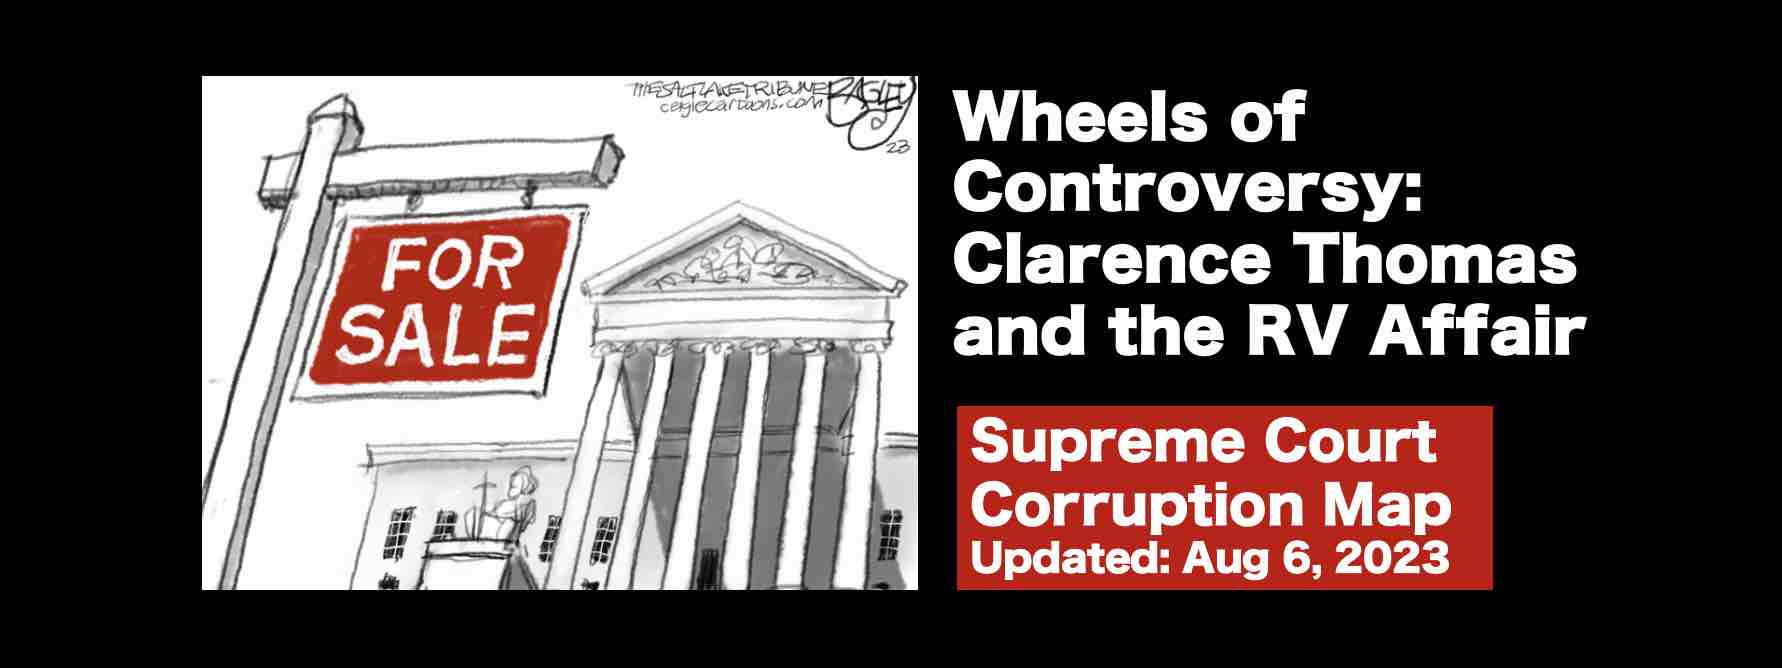 Supreme Court Corruption. Wheels of Controversy around Clarence Thomas and RV